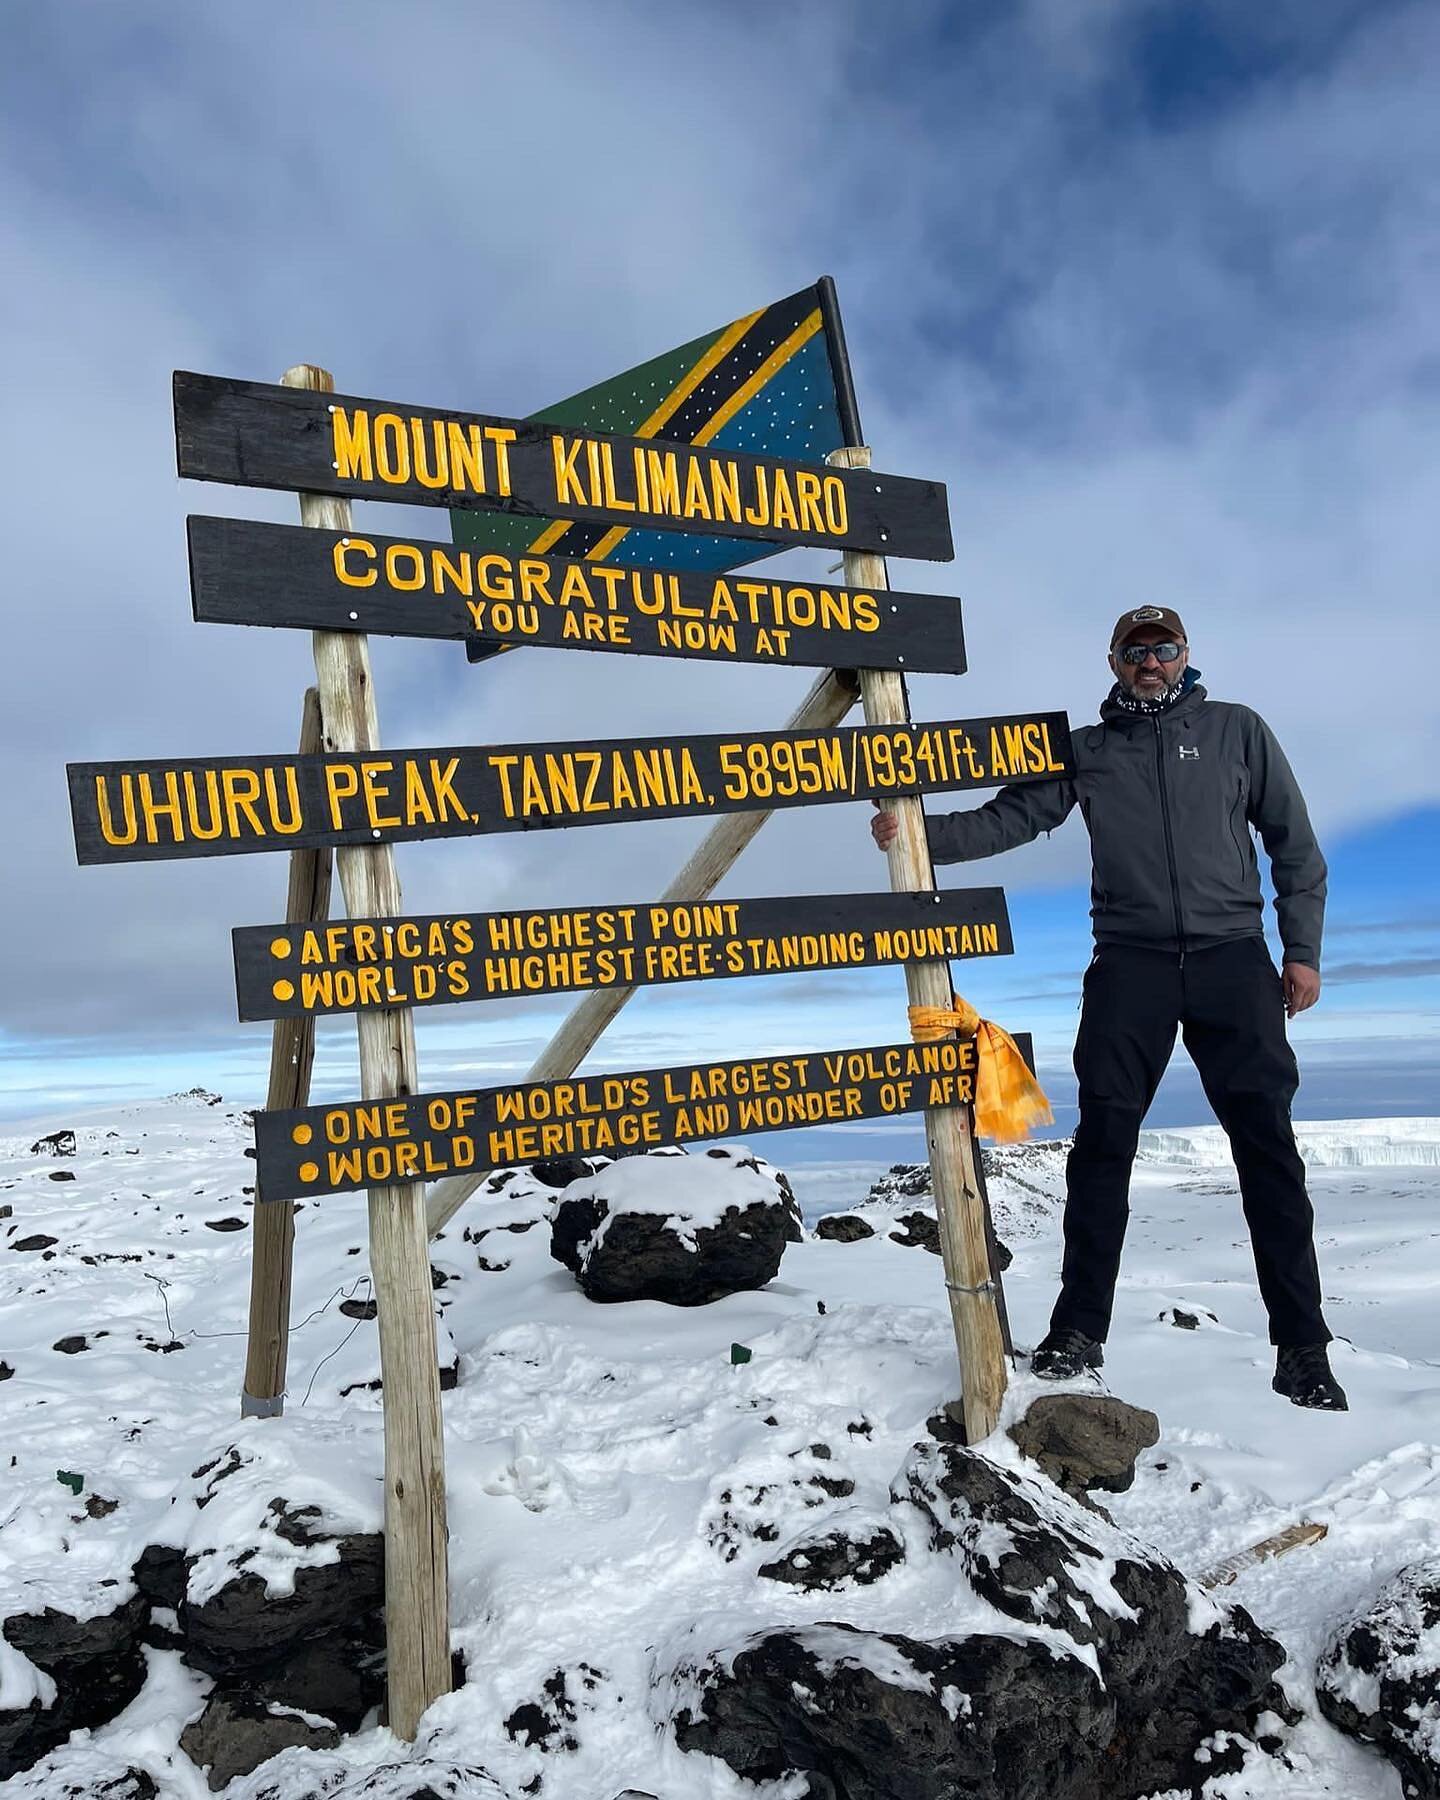 This marks the 34th time that I take a team to the summit of Kilimanjaro.  I&rsquo;ve been able to take more than 500 people to the summit including heroes like Ali Sawalmeh on a wheelchair and Suhail al-Nashash.  During these many trips, I was able 